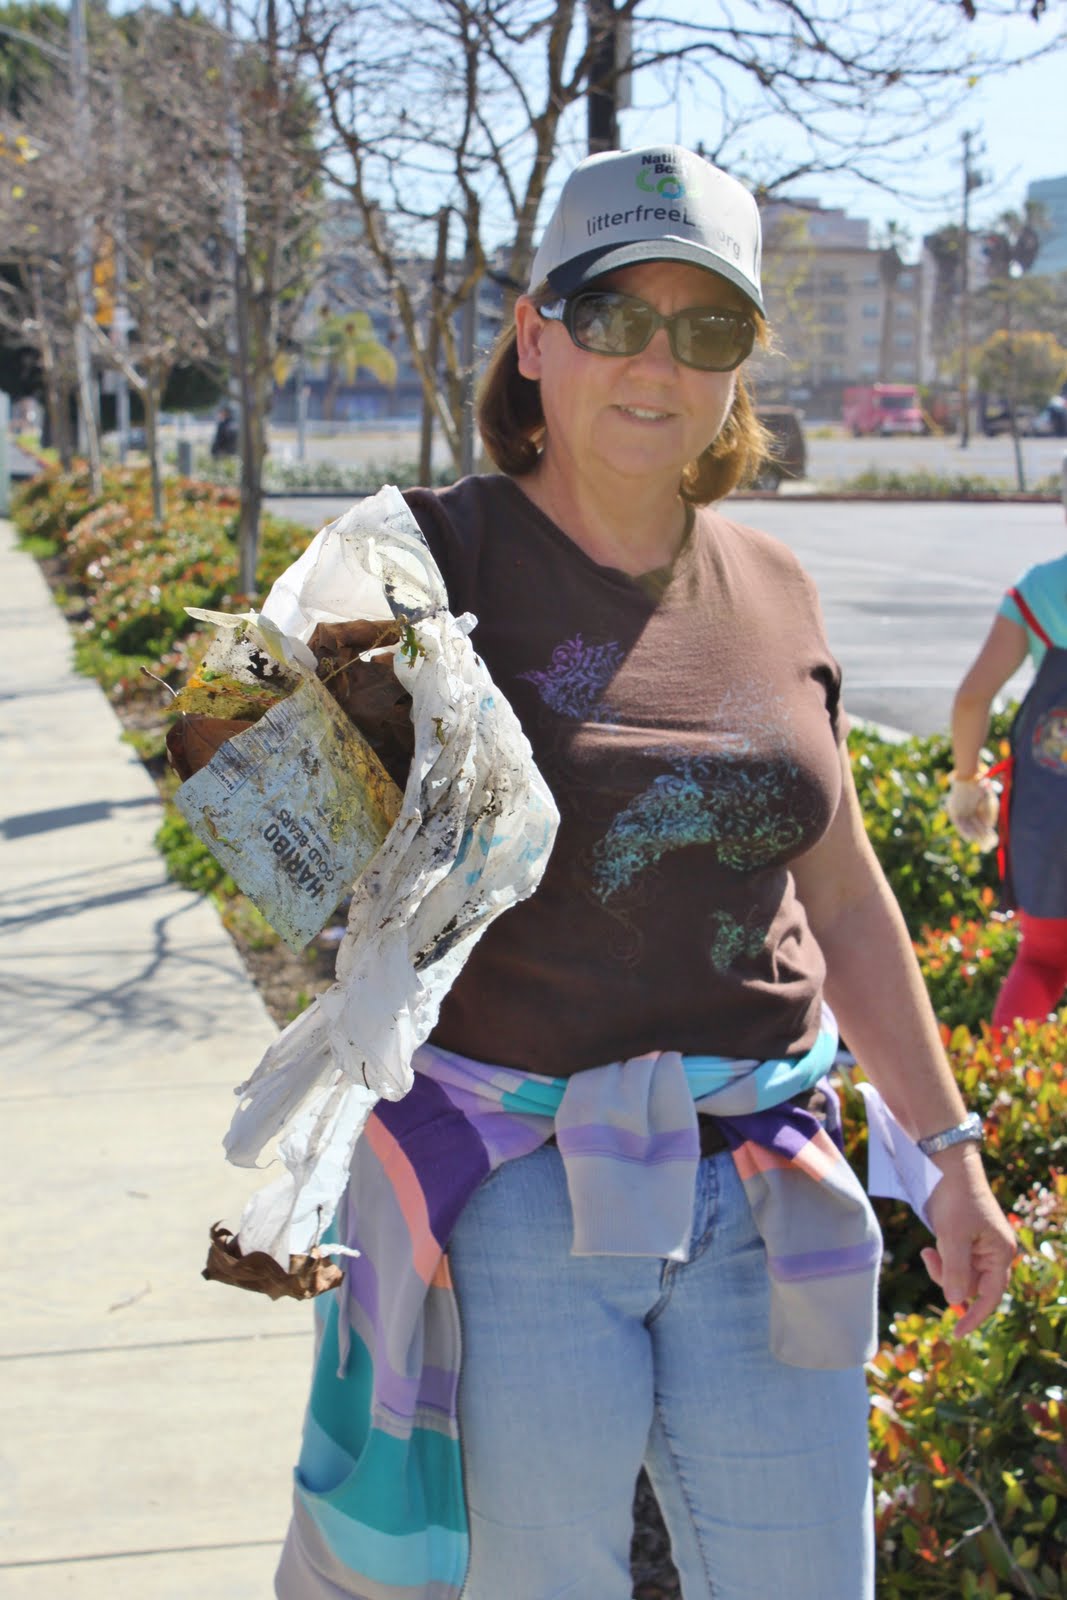 HUNTINGTON BEACH GIRL SCOUT TROOP 746 NEIGHBORHOOD CLEAN UP DAY And